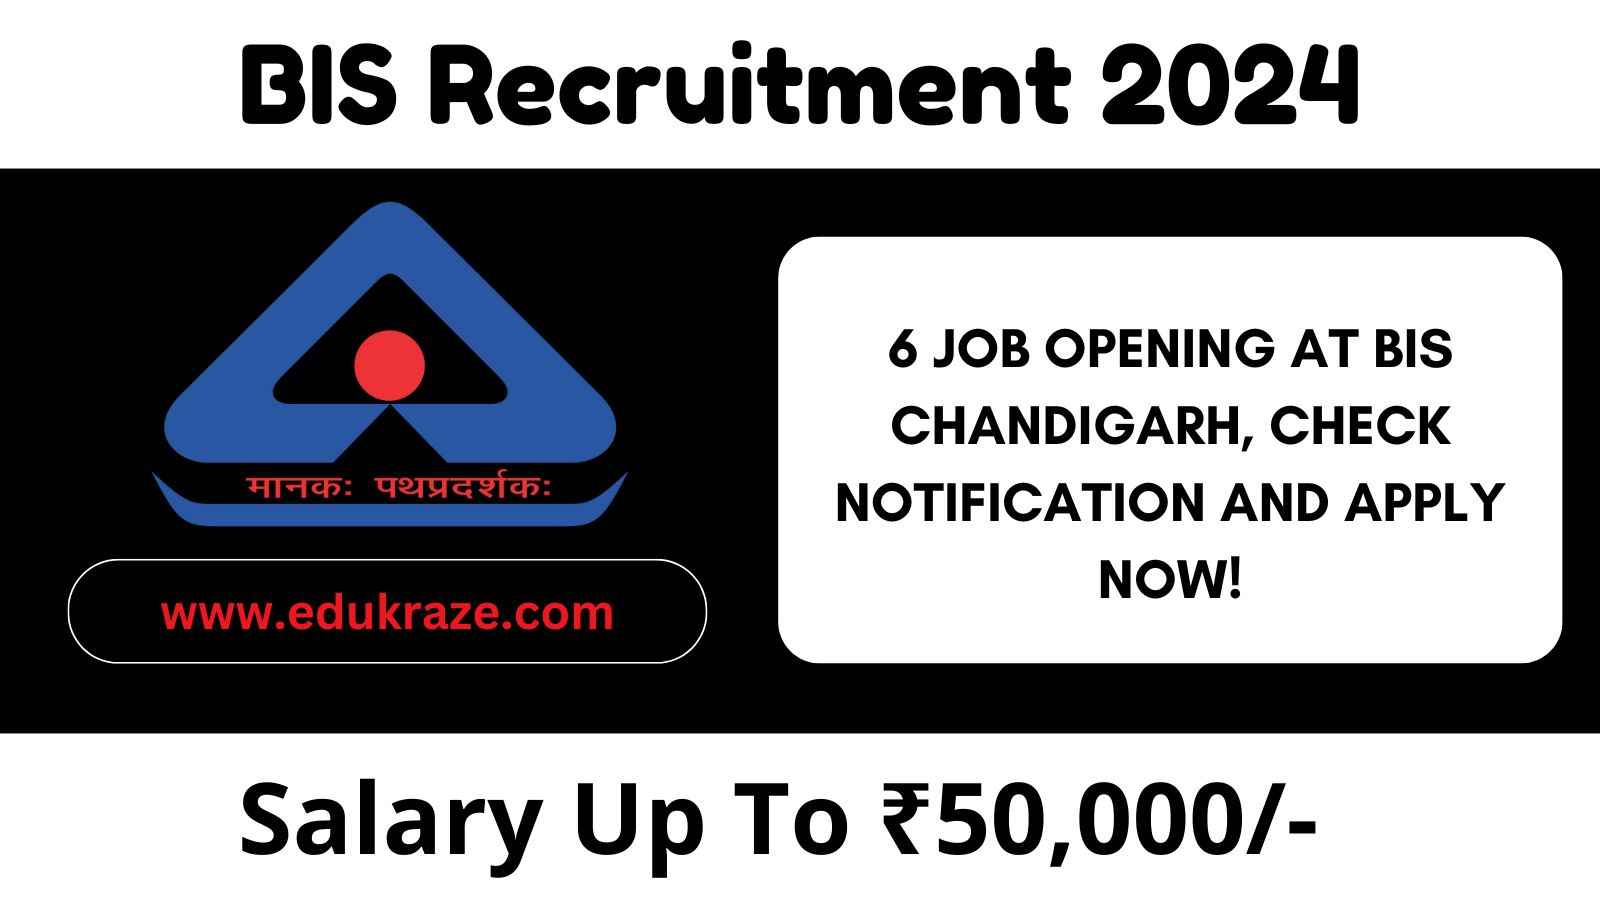 BIS Northern Regional Office Recruitment 2024: Apply for Consultant Positions in Chandigarh